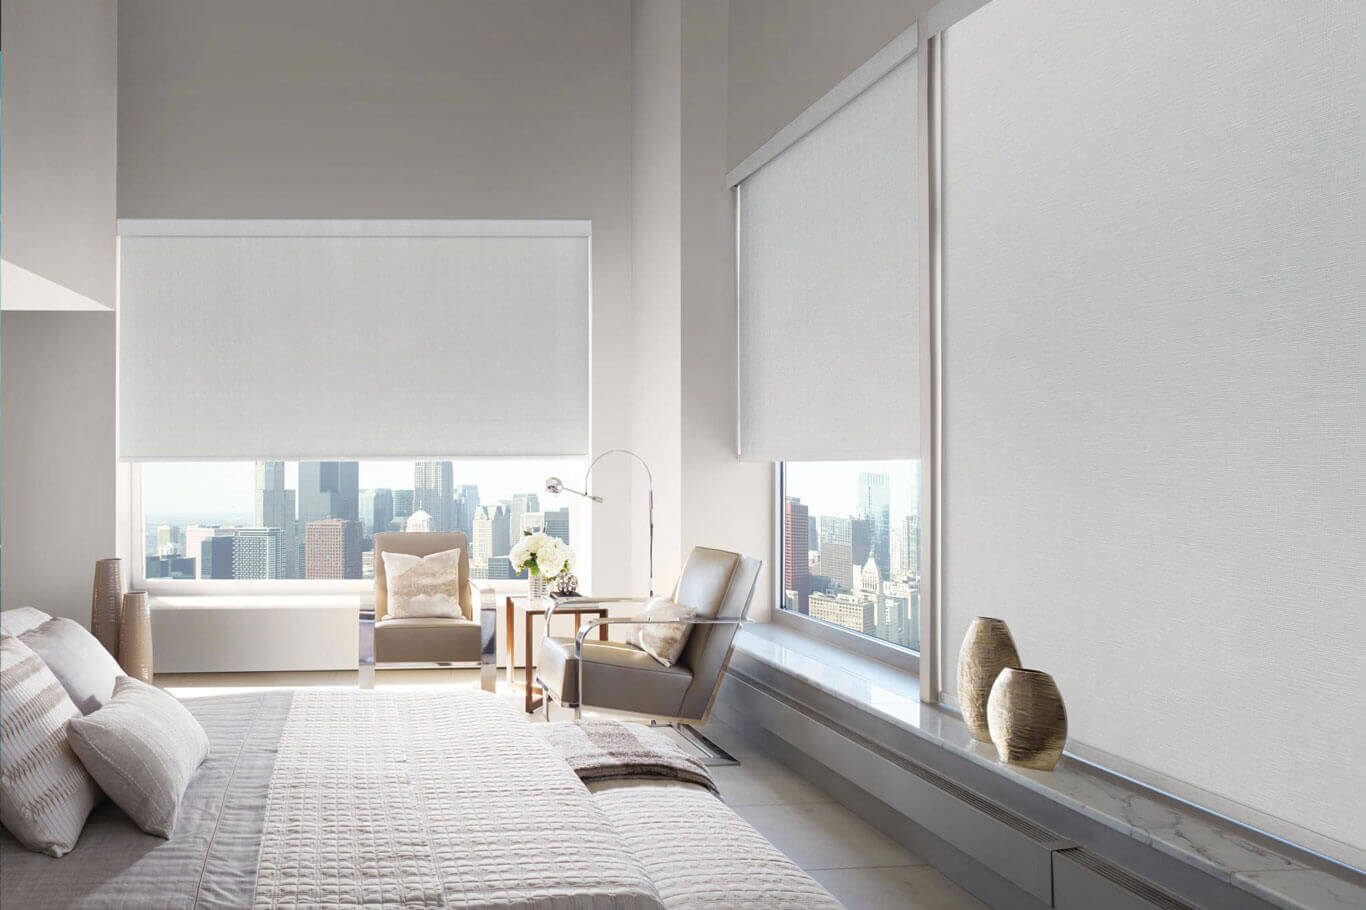 How To Clean Roller Blinds Curtains? A Step By Step Guide